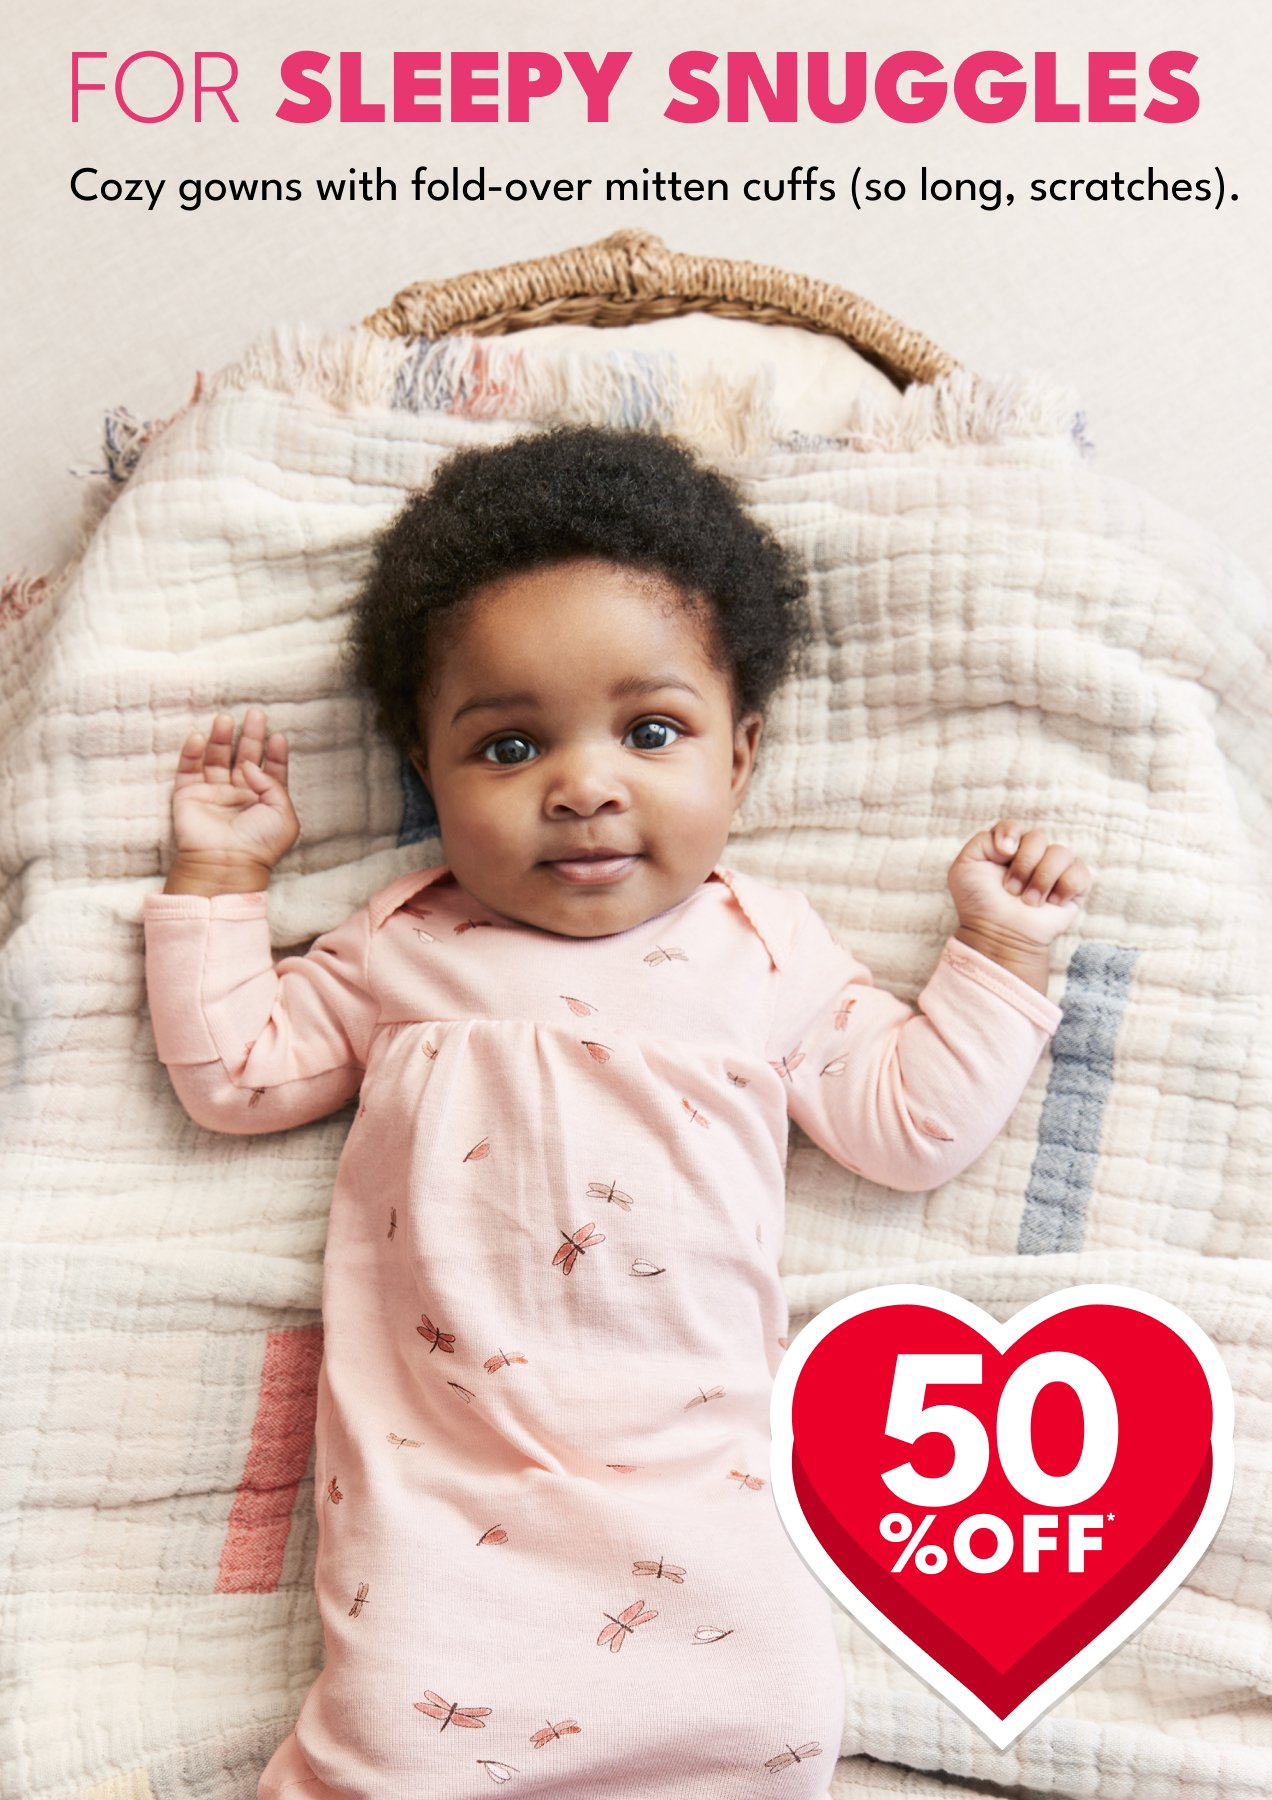 FOR SLEEPY SNUGGLES | Cozy gowns with fold-over mitten cuffs (so long, scratches). | 50% OFF*